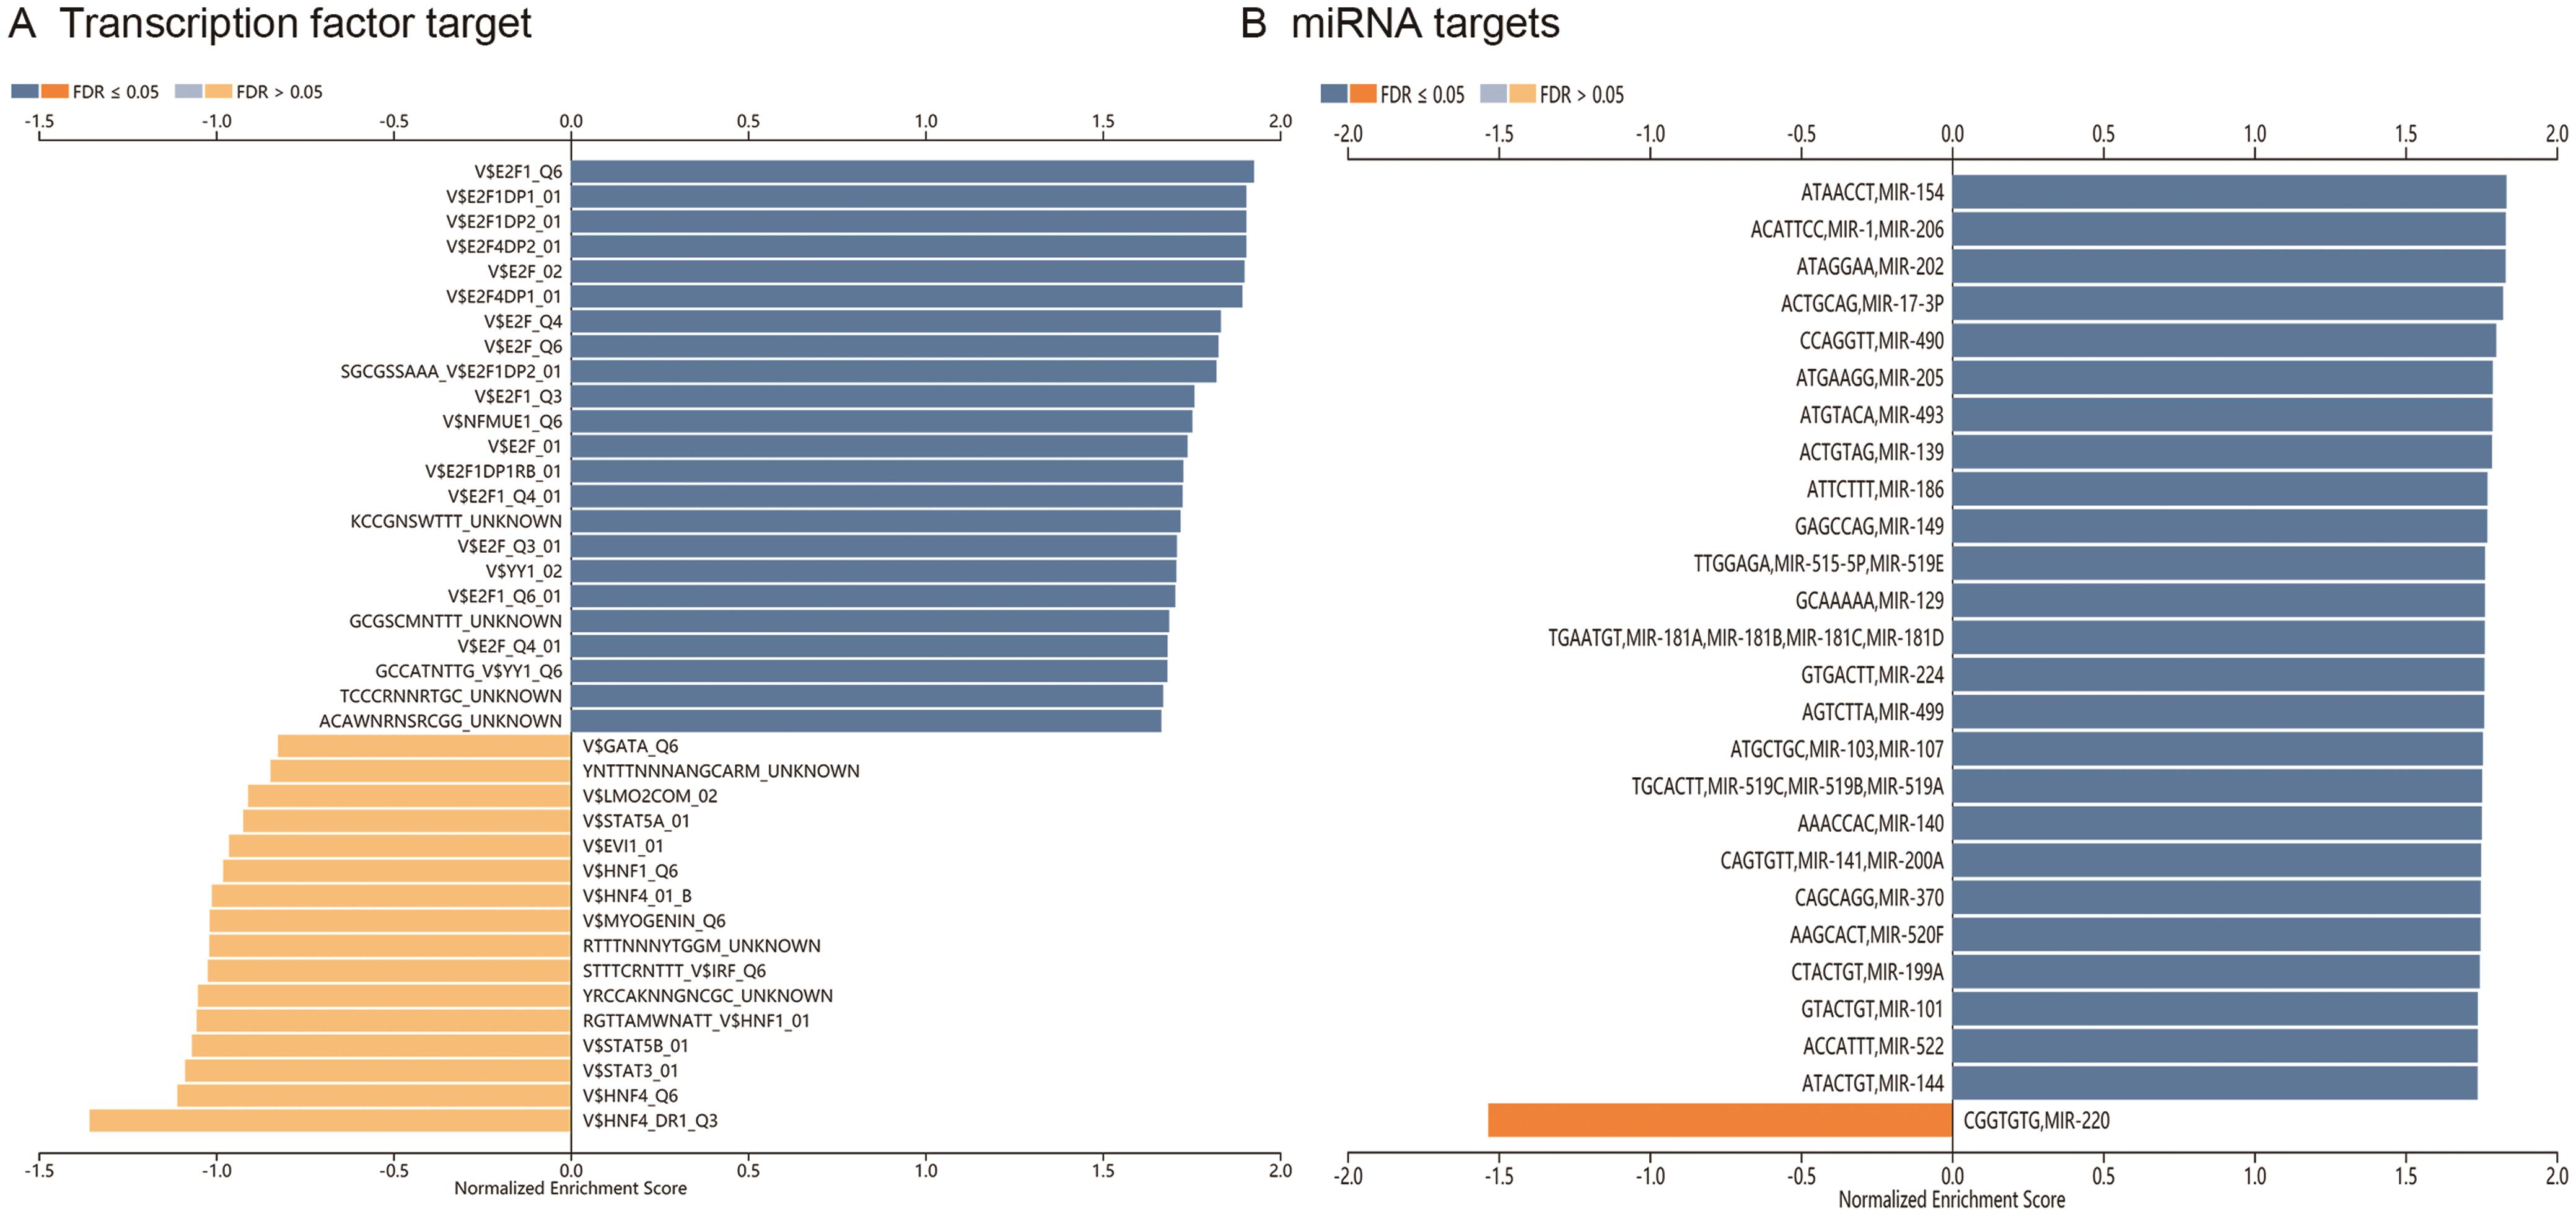 MiRNA and transcription factor targets related to <italic>SNHG4</italic> in HCC (LinkedOmics).